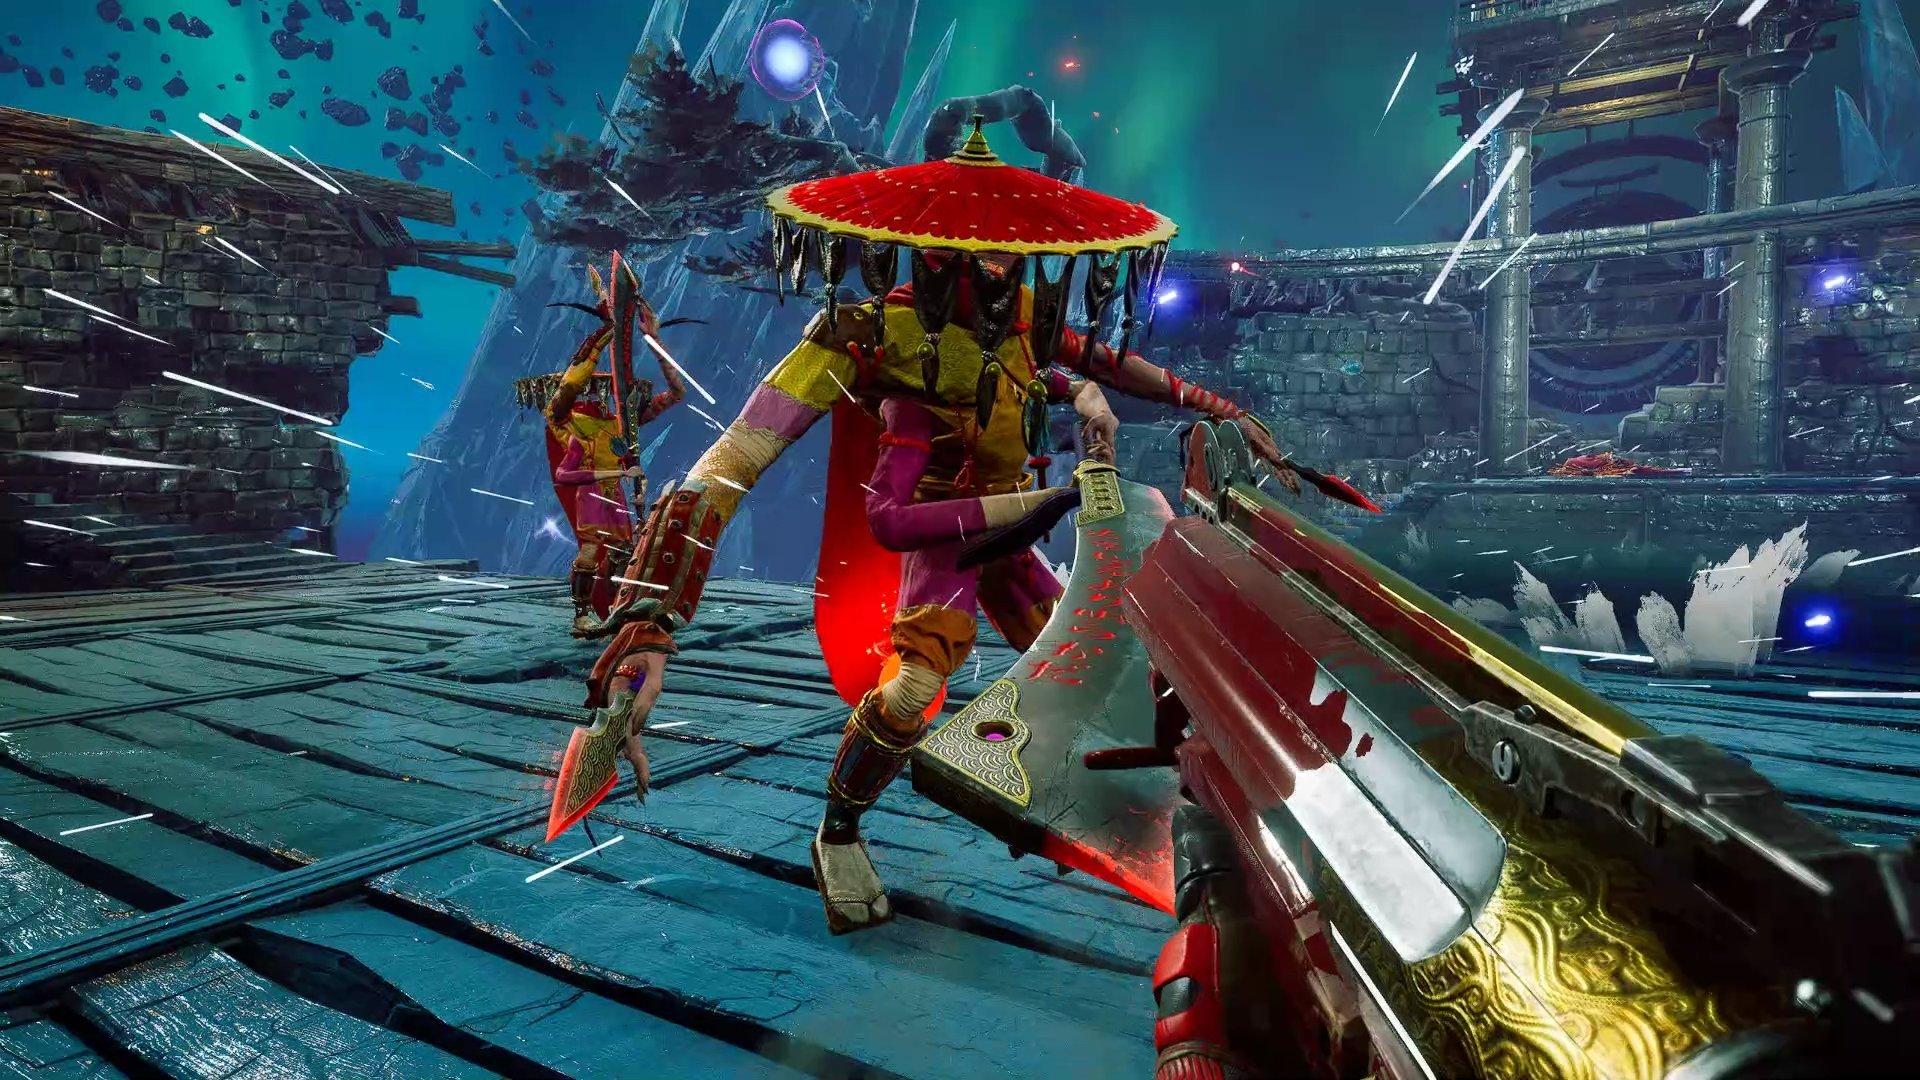 Review: Shadow Warrior (Xbox One) - Hardcore Gamer